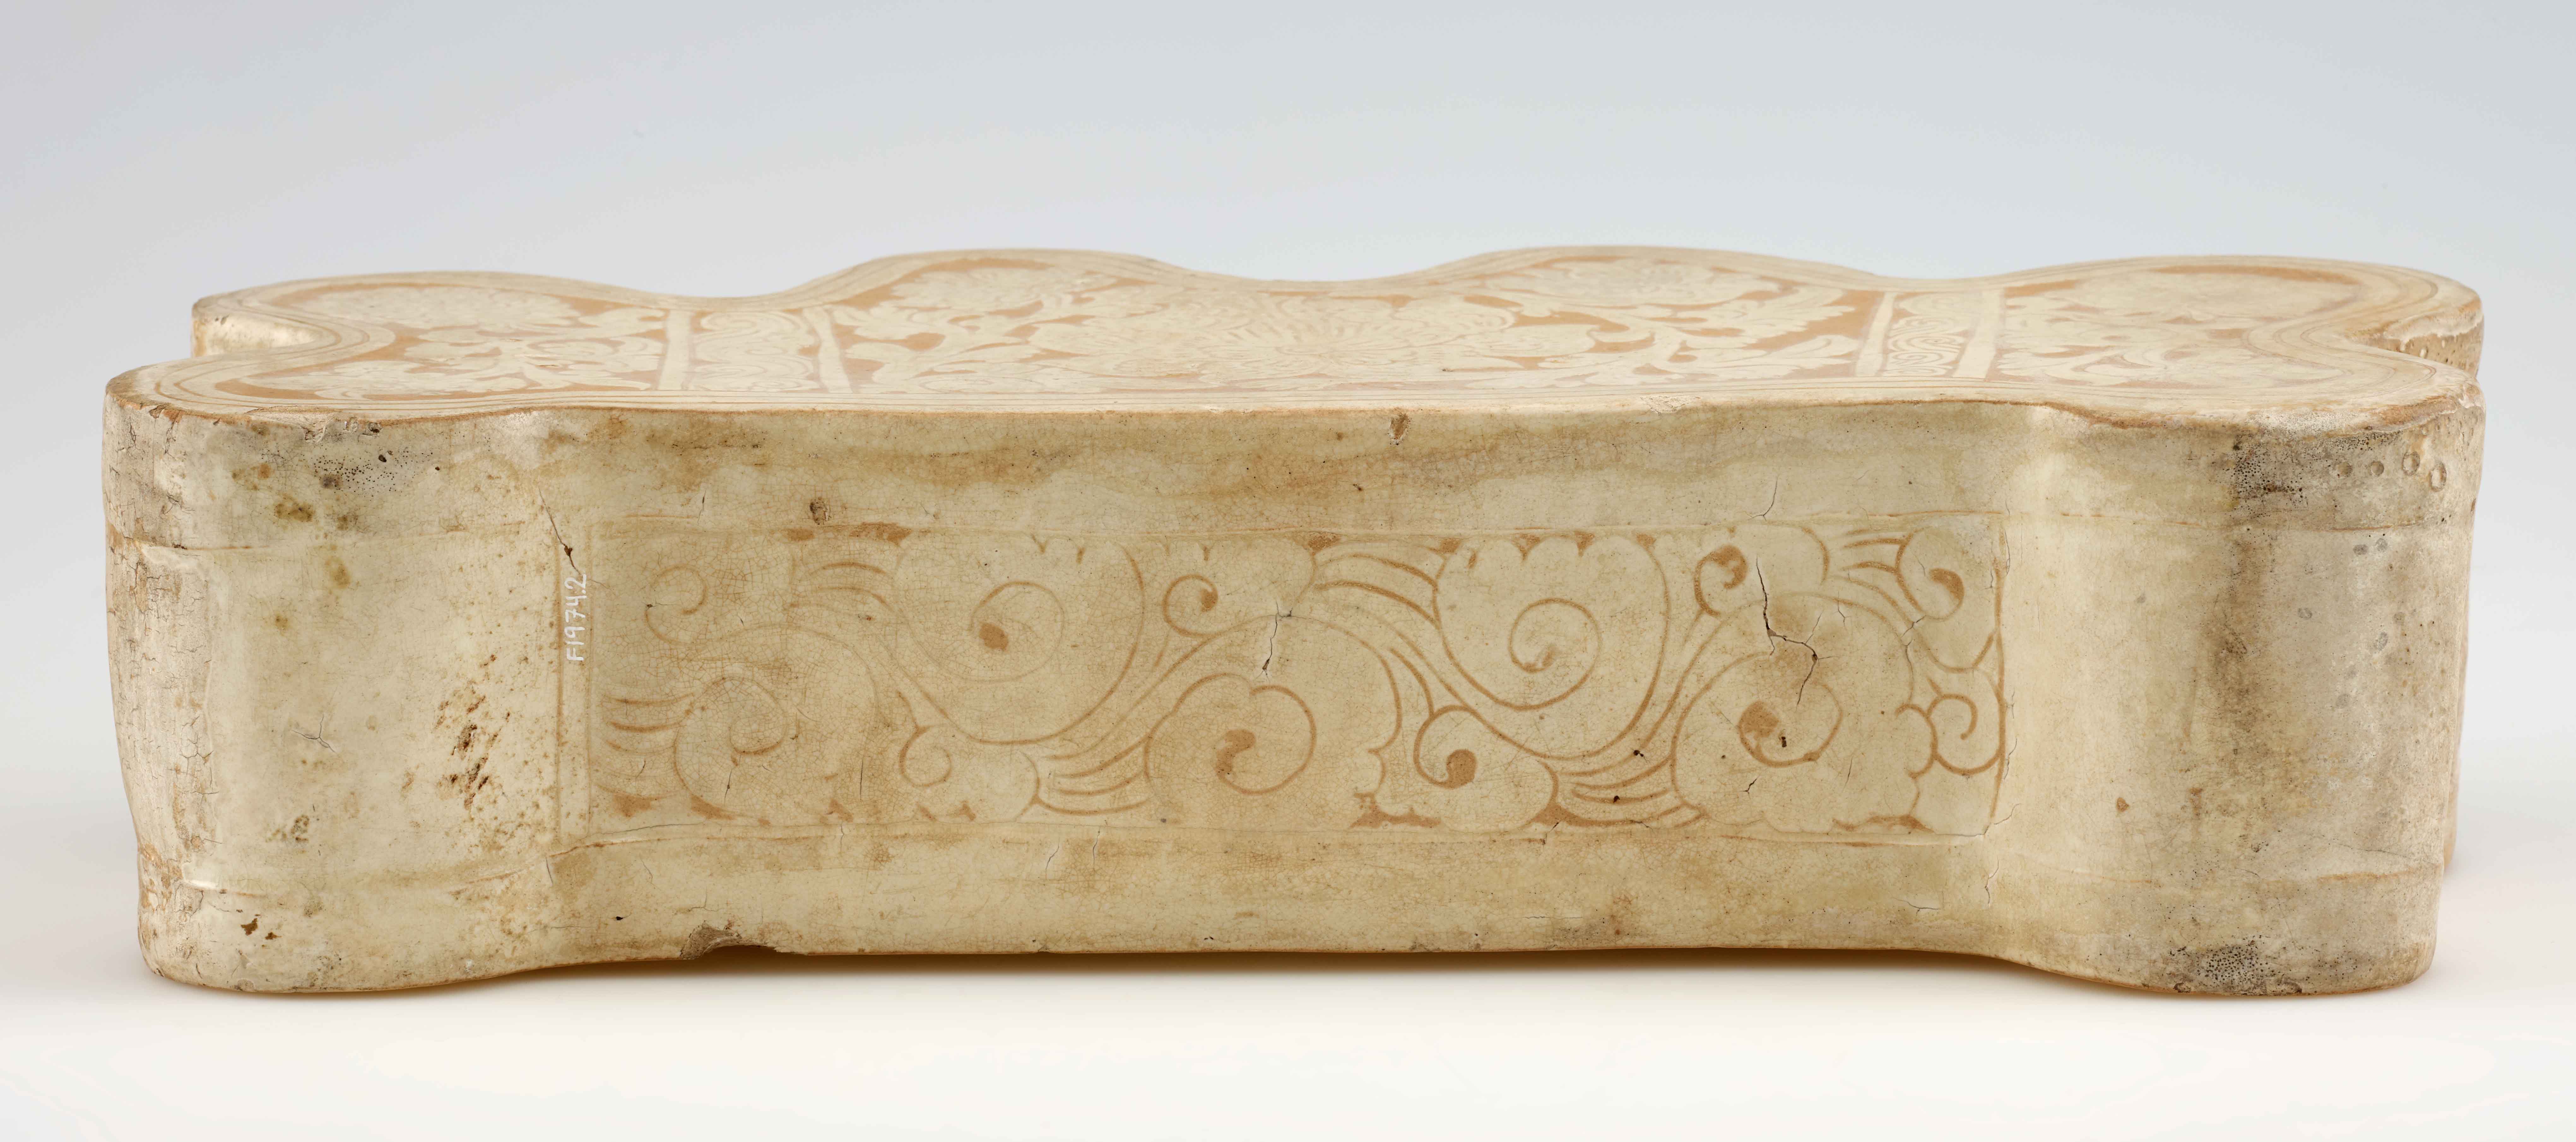 Pillow, Northern Song dynasty, 1063, Cizhou-type ware, stoneware with white slip under transparent colorless glaze, China, probably southern Shaanxi province, 19.2 x 39.8 x 10 cm (Freer Gallery of Art, Smithsonian Institution, Washington, DC: Gift of Eugene and Agnes E. Meyer, F1974.2)